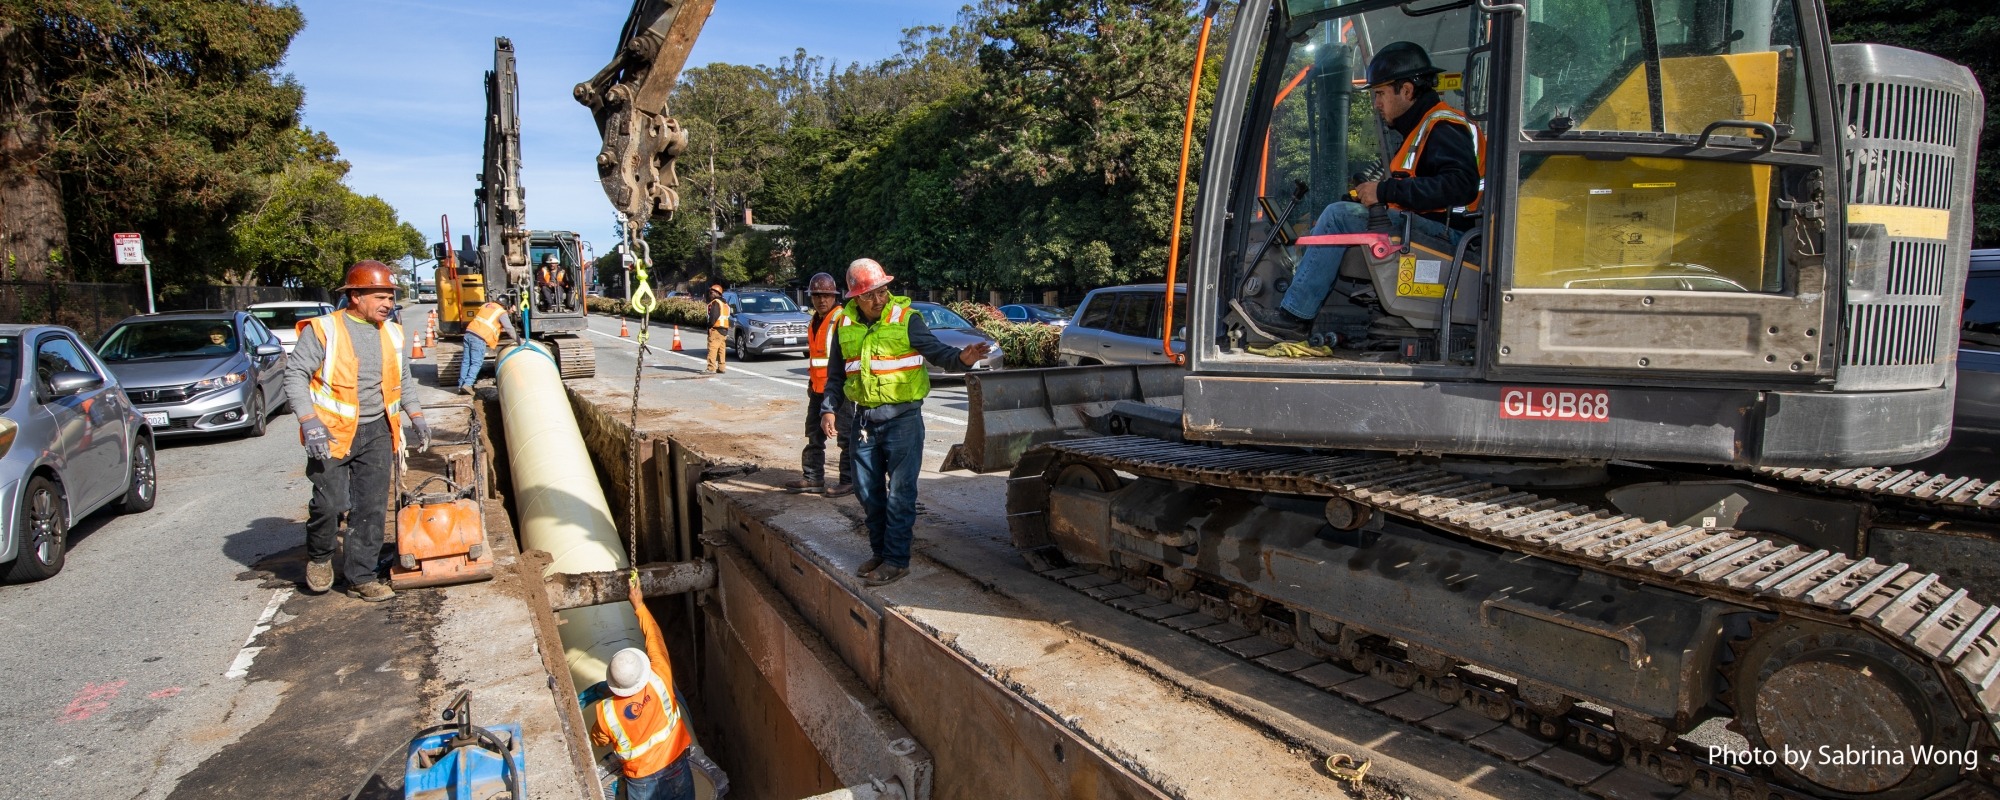 Installing a new welded steel pipe for Potable Emergency Firefighting Water Systems pipeline at 19th Ave. and Sloat Blvd.